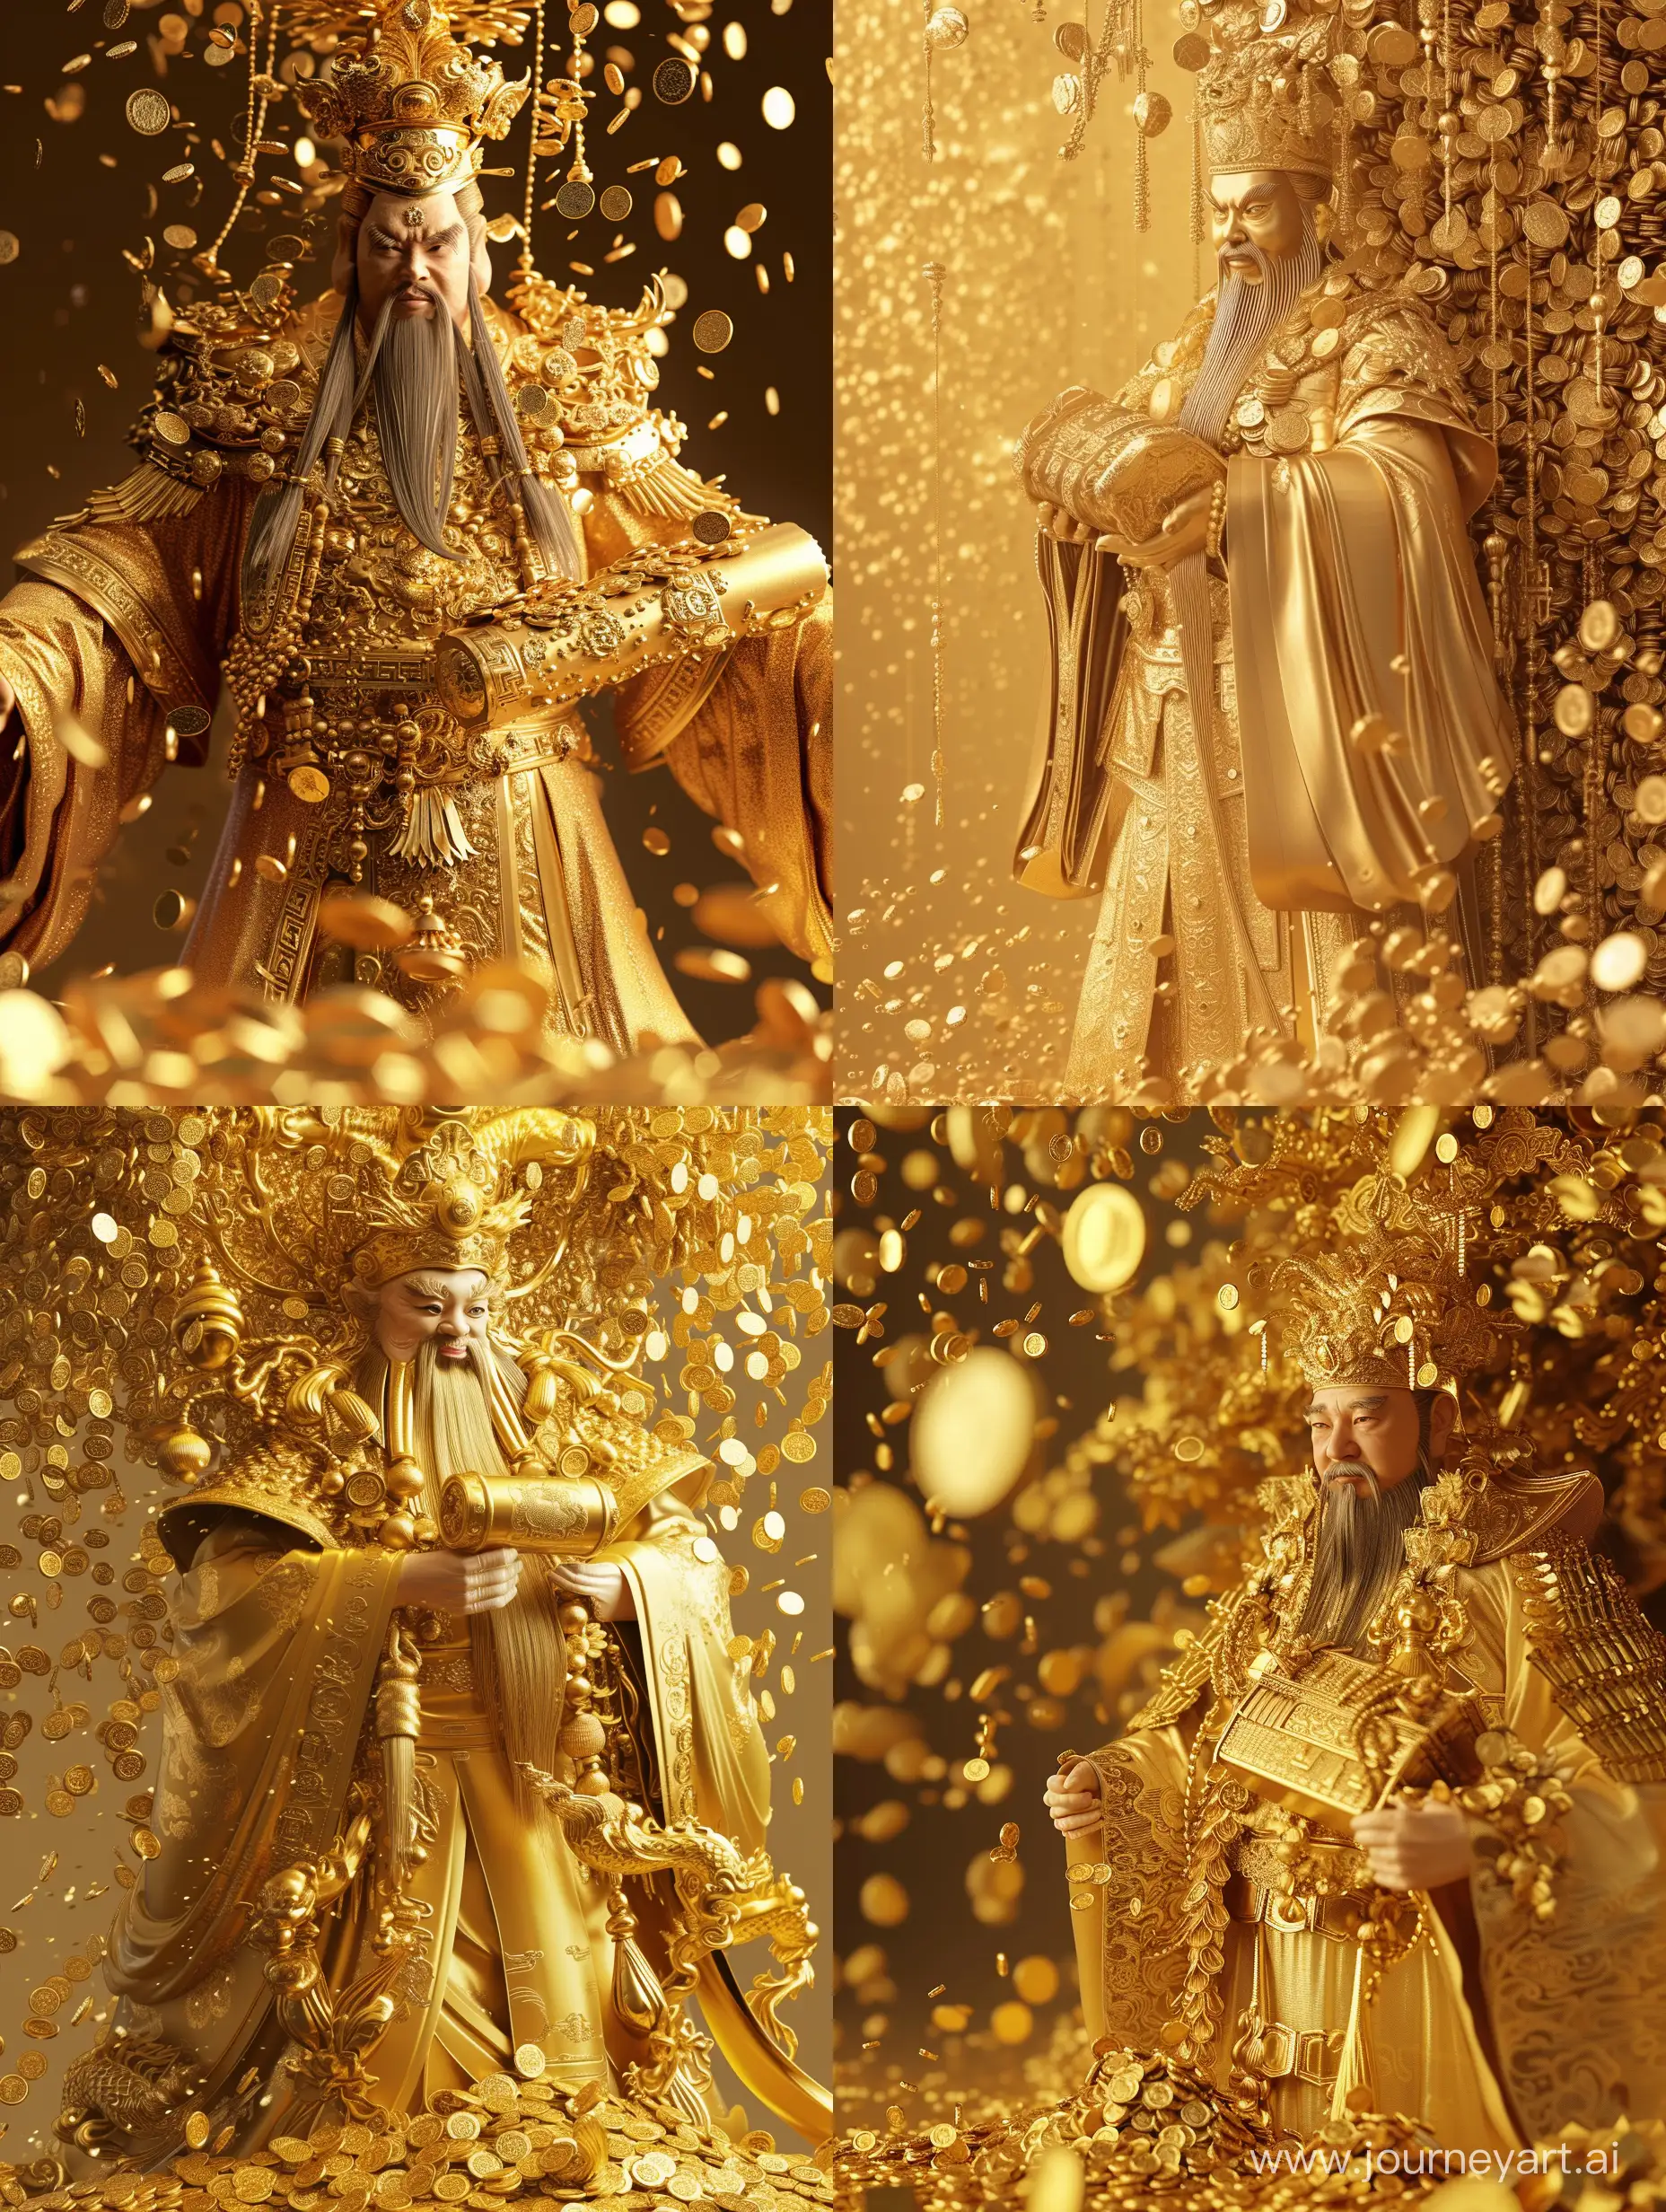  Chinese God of Wealth 3D Image,A deity adorned in golden attire, exuding an aura of prosperity.,Golden clothing and accessories, prominently displaying a gold ingot in his embrace.,A shower of gold coins cascading from above, with scattered coins at his feet, symbolizing wealth and abundance.,Highly detailed, with meticulous attention to the textures and reflections on the metallic surfaces.
Artist Name: Nelson Wu,Predominantly gold tones, accented by warm, rich hues that enhance the opulence of the scene.,Top-tier, featuring exquisite detailing and masterful use of light to create a stunning visual spectacle.,Close-up shot to capture the intricate details, with a slight tilt down to emphasize the grandeur of the god of wealth and the profusion of wealth beneath him.